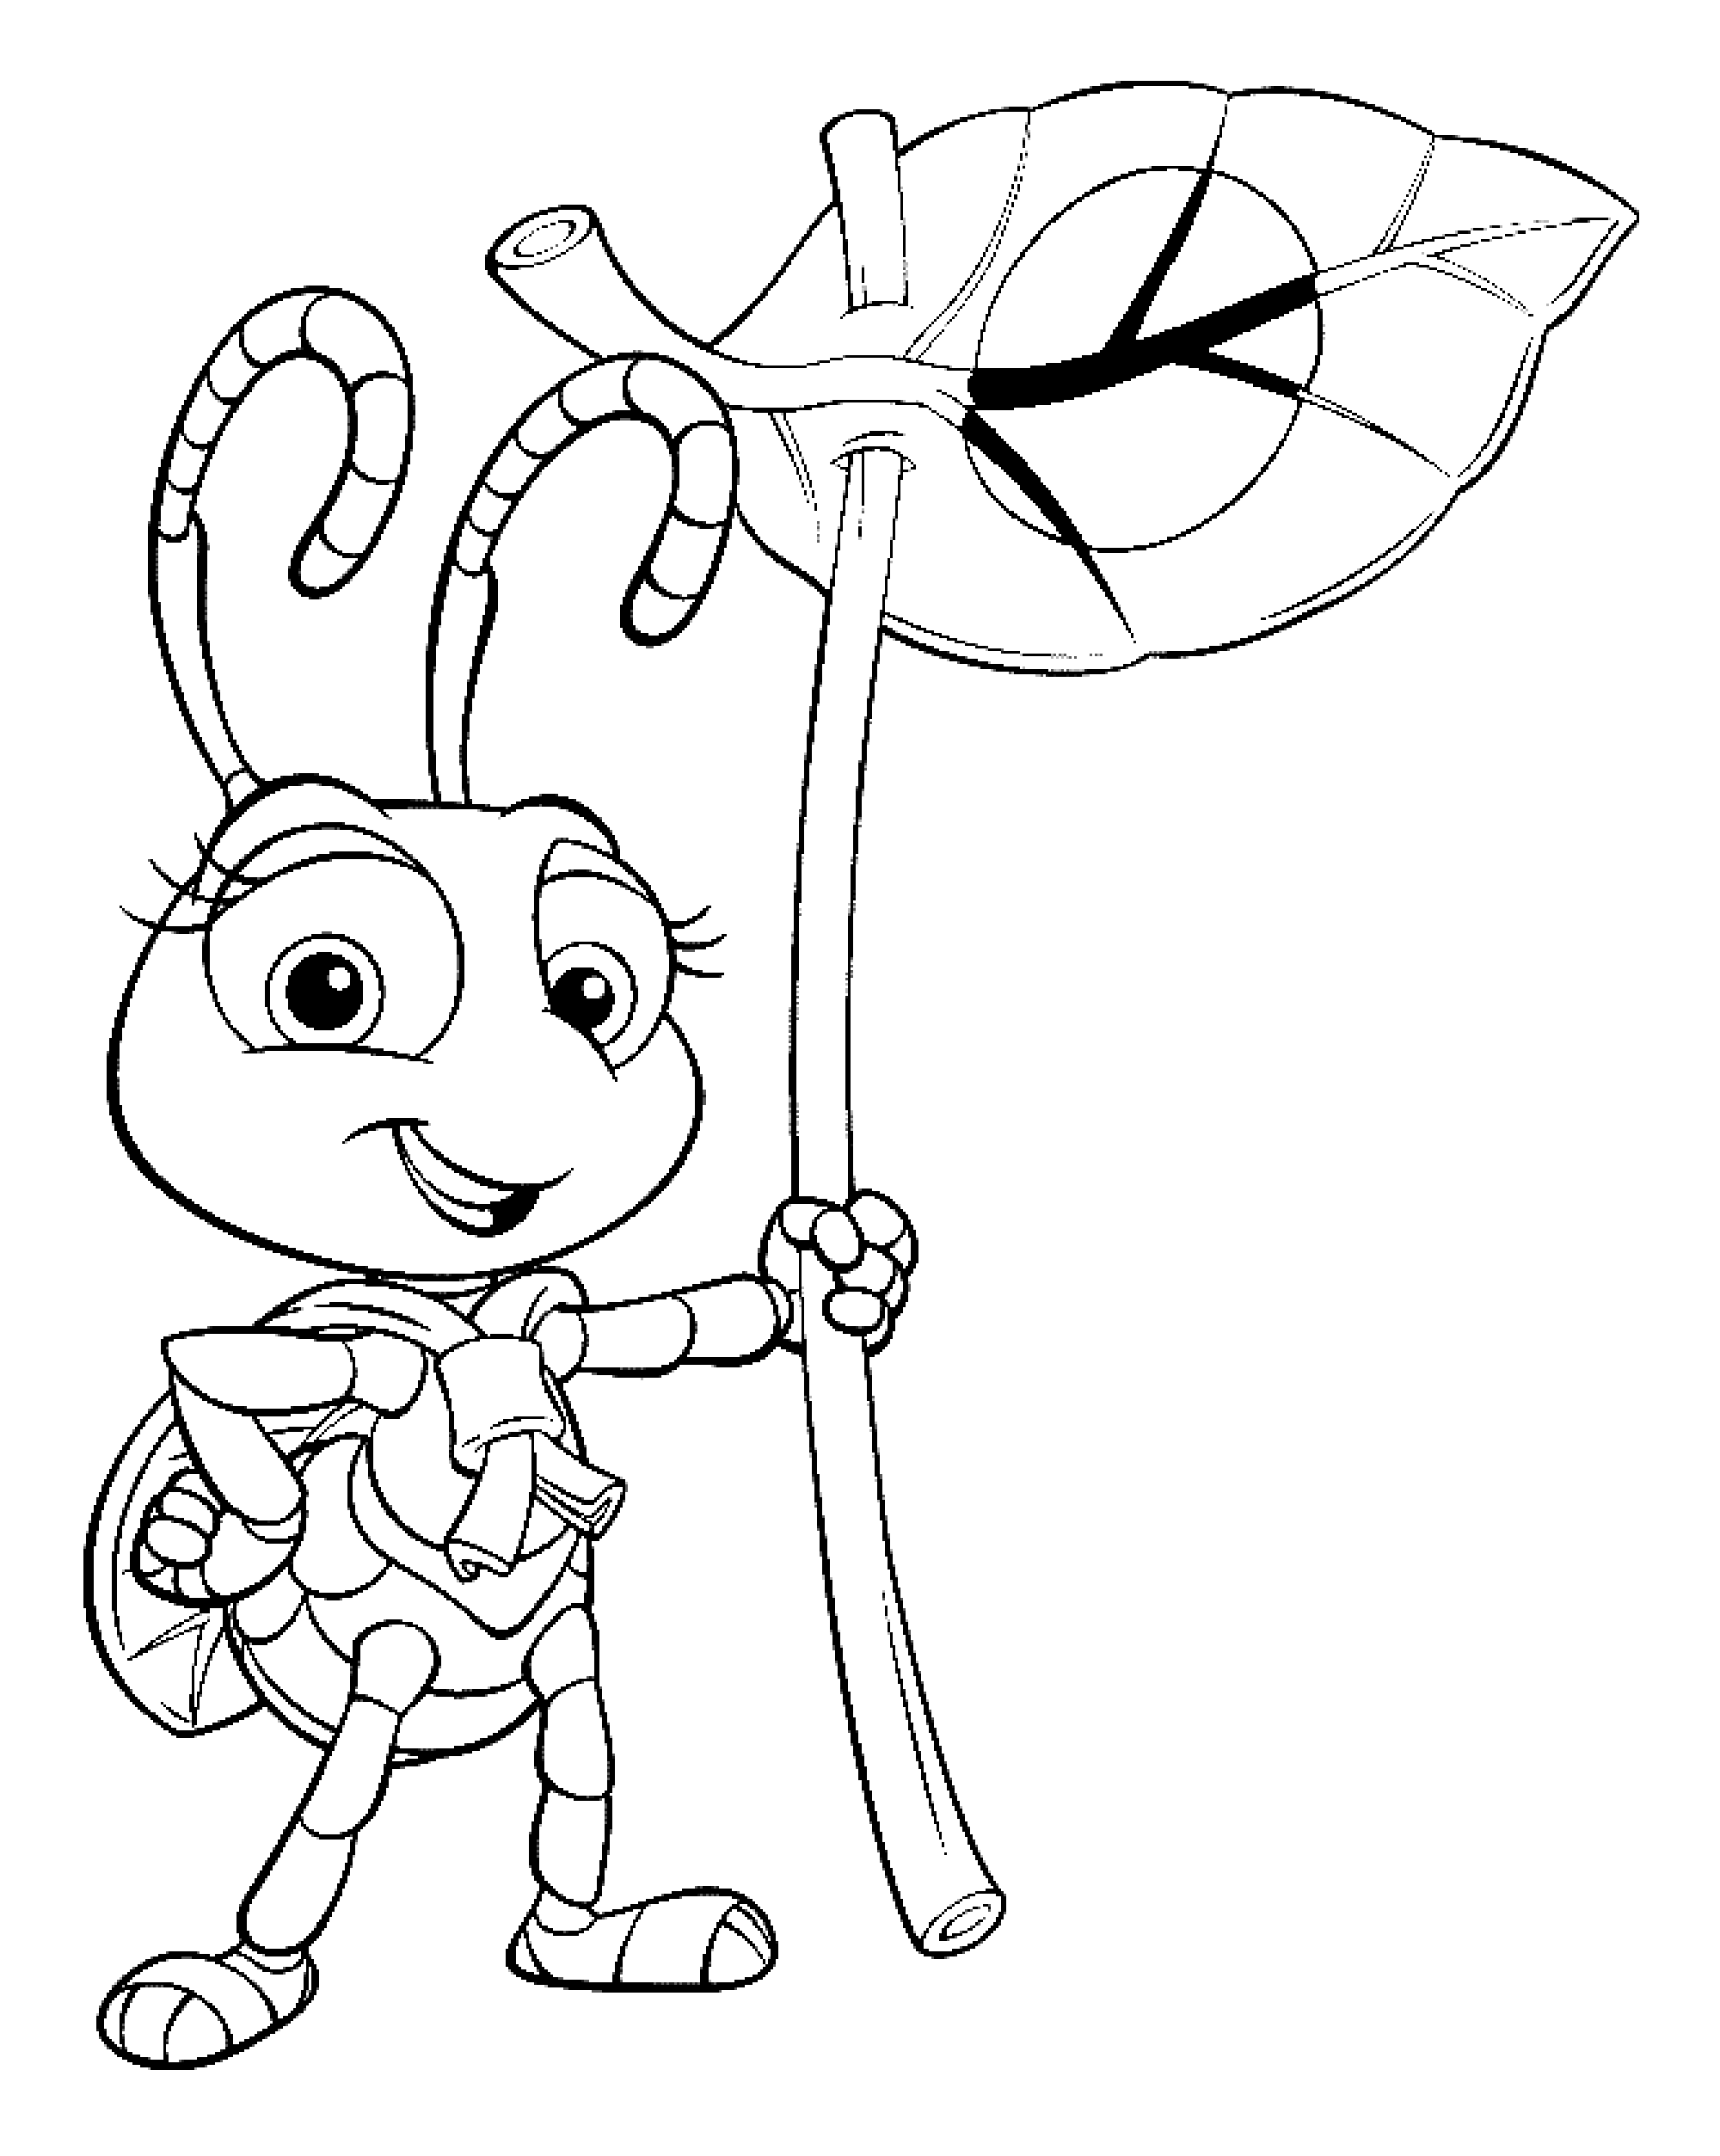 A bugs life to color for kids - A Bugs Life Kids Coloring Pages